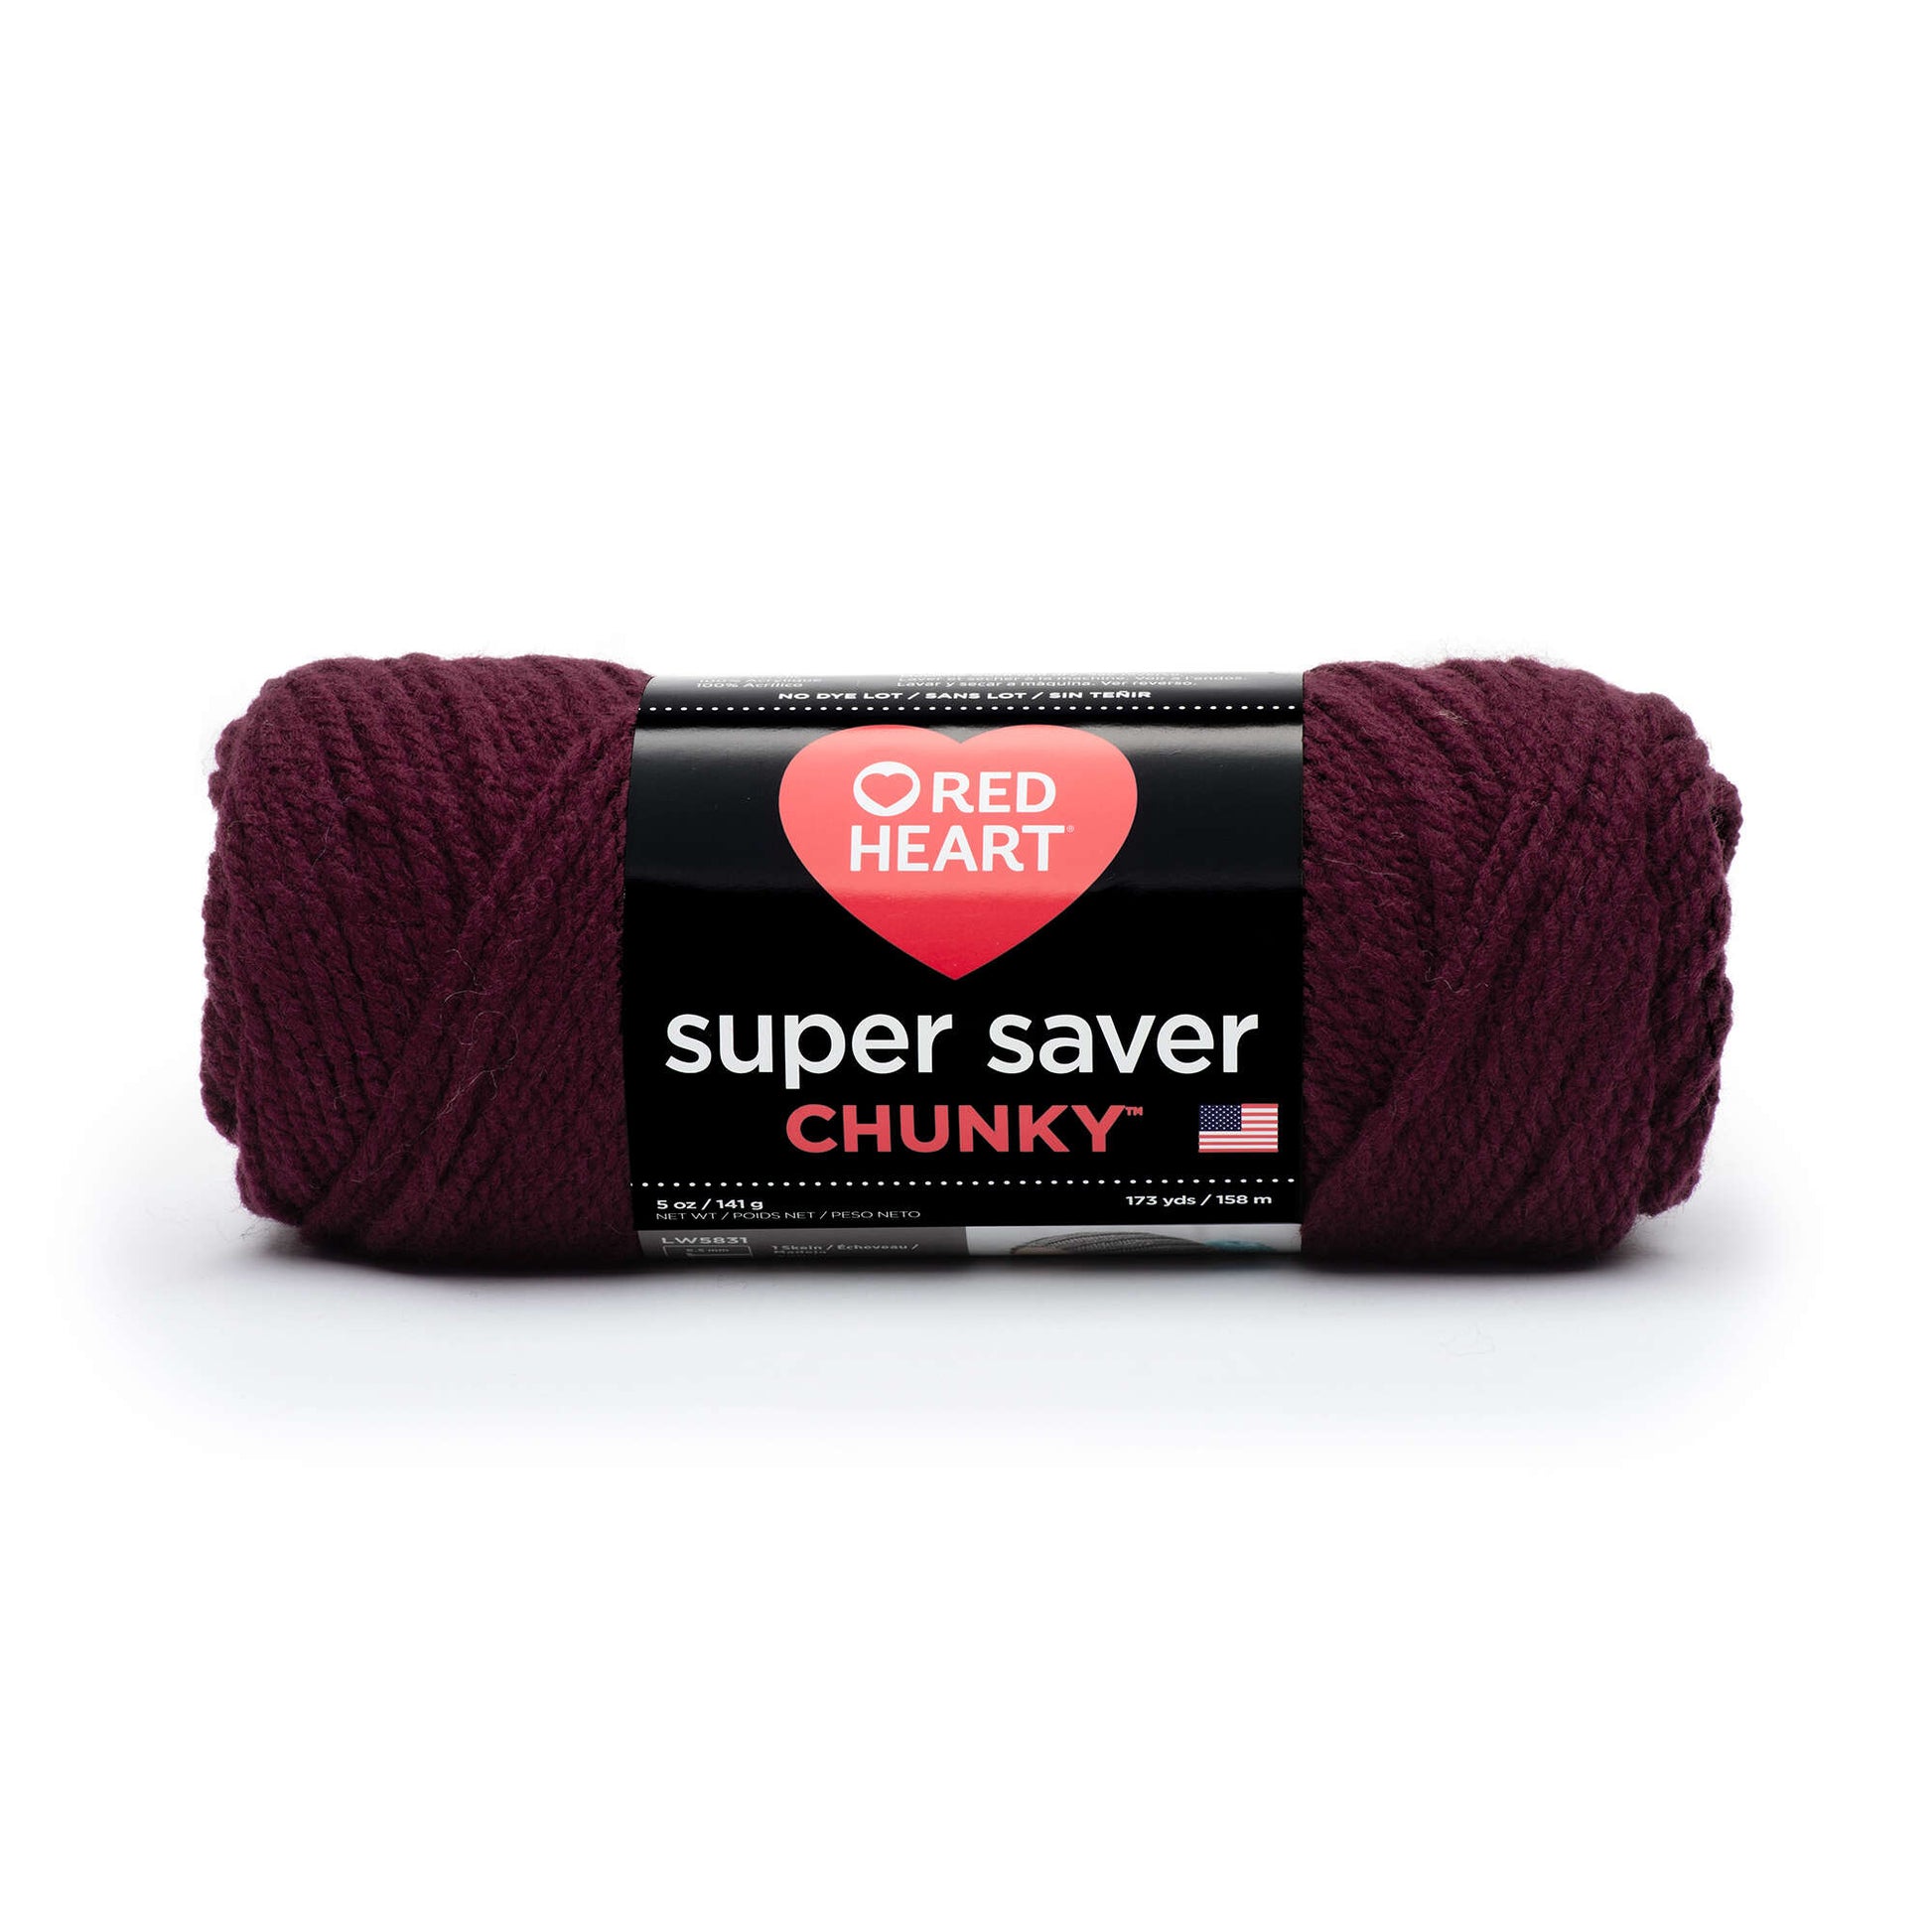 Favorite Bulky and Super Bulky Yarn